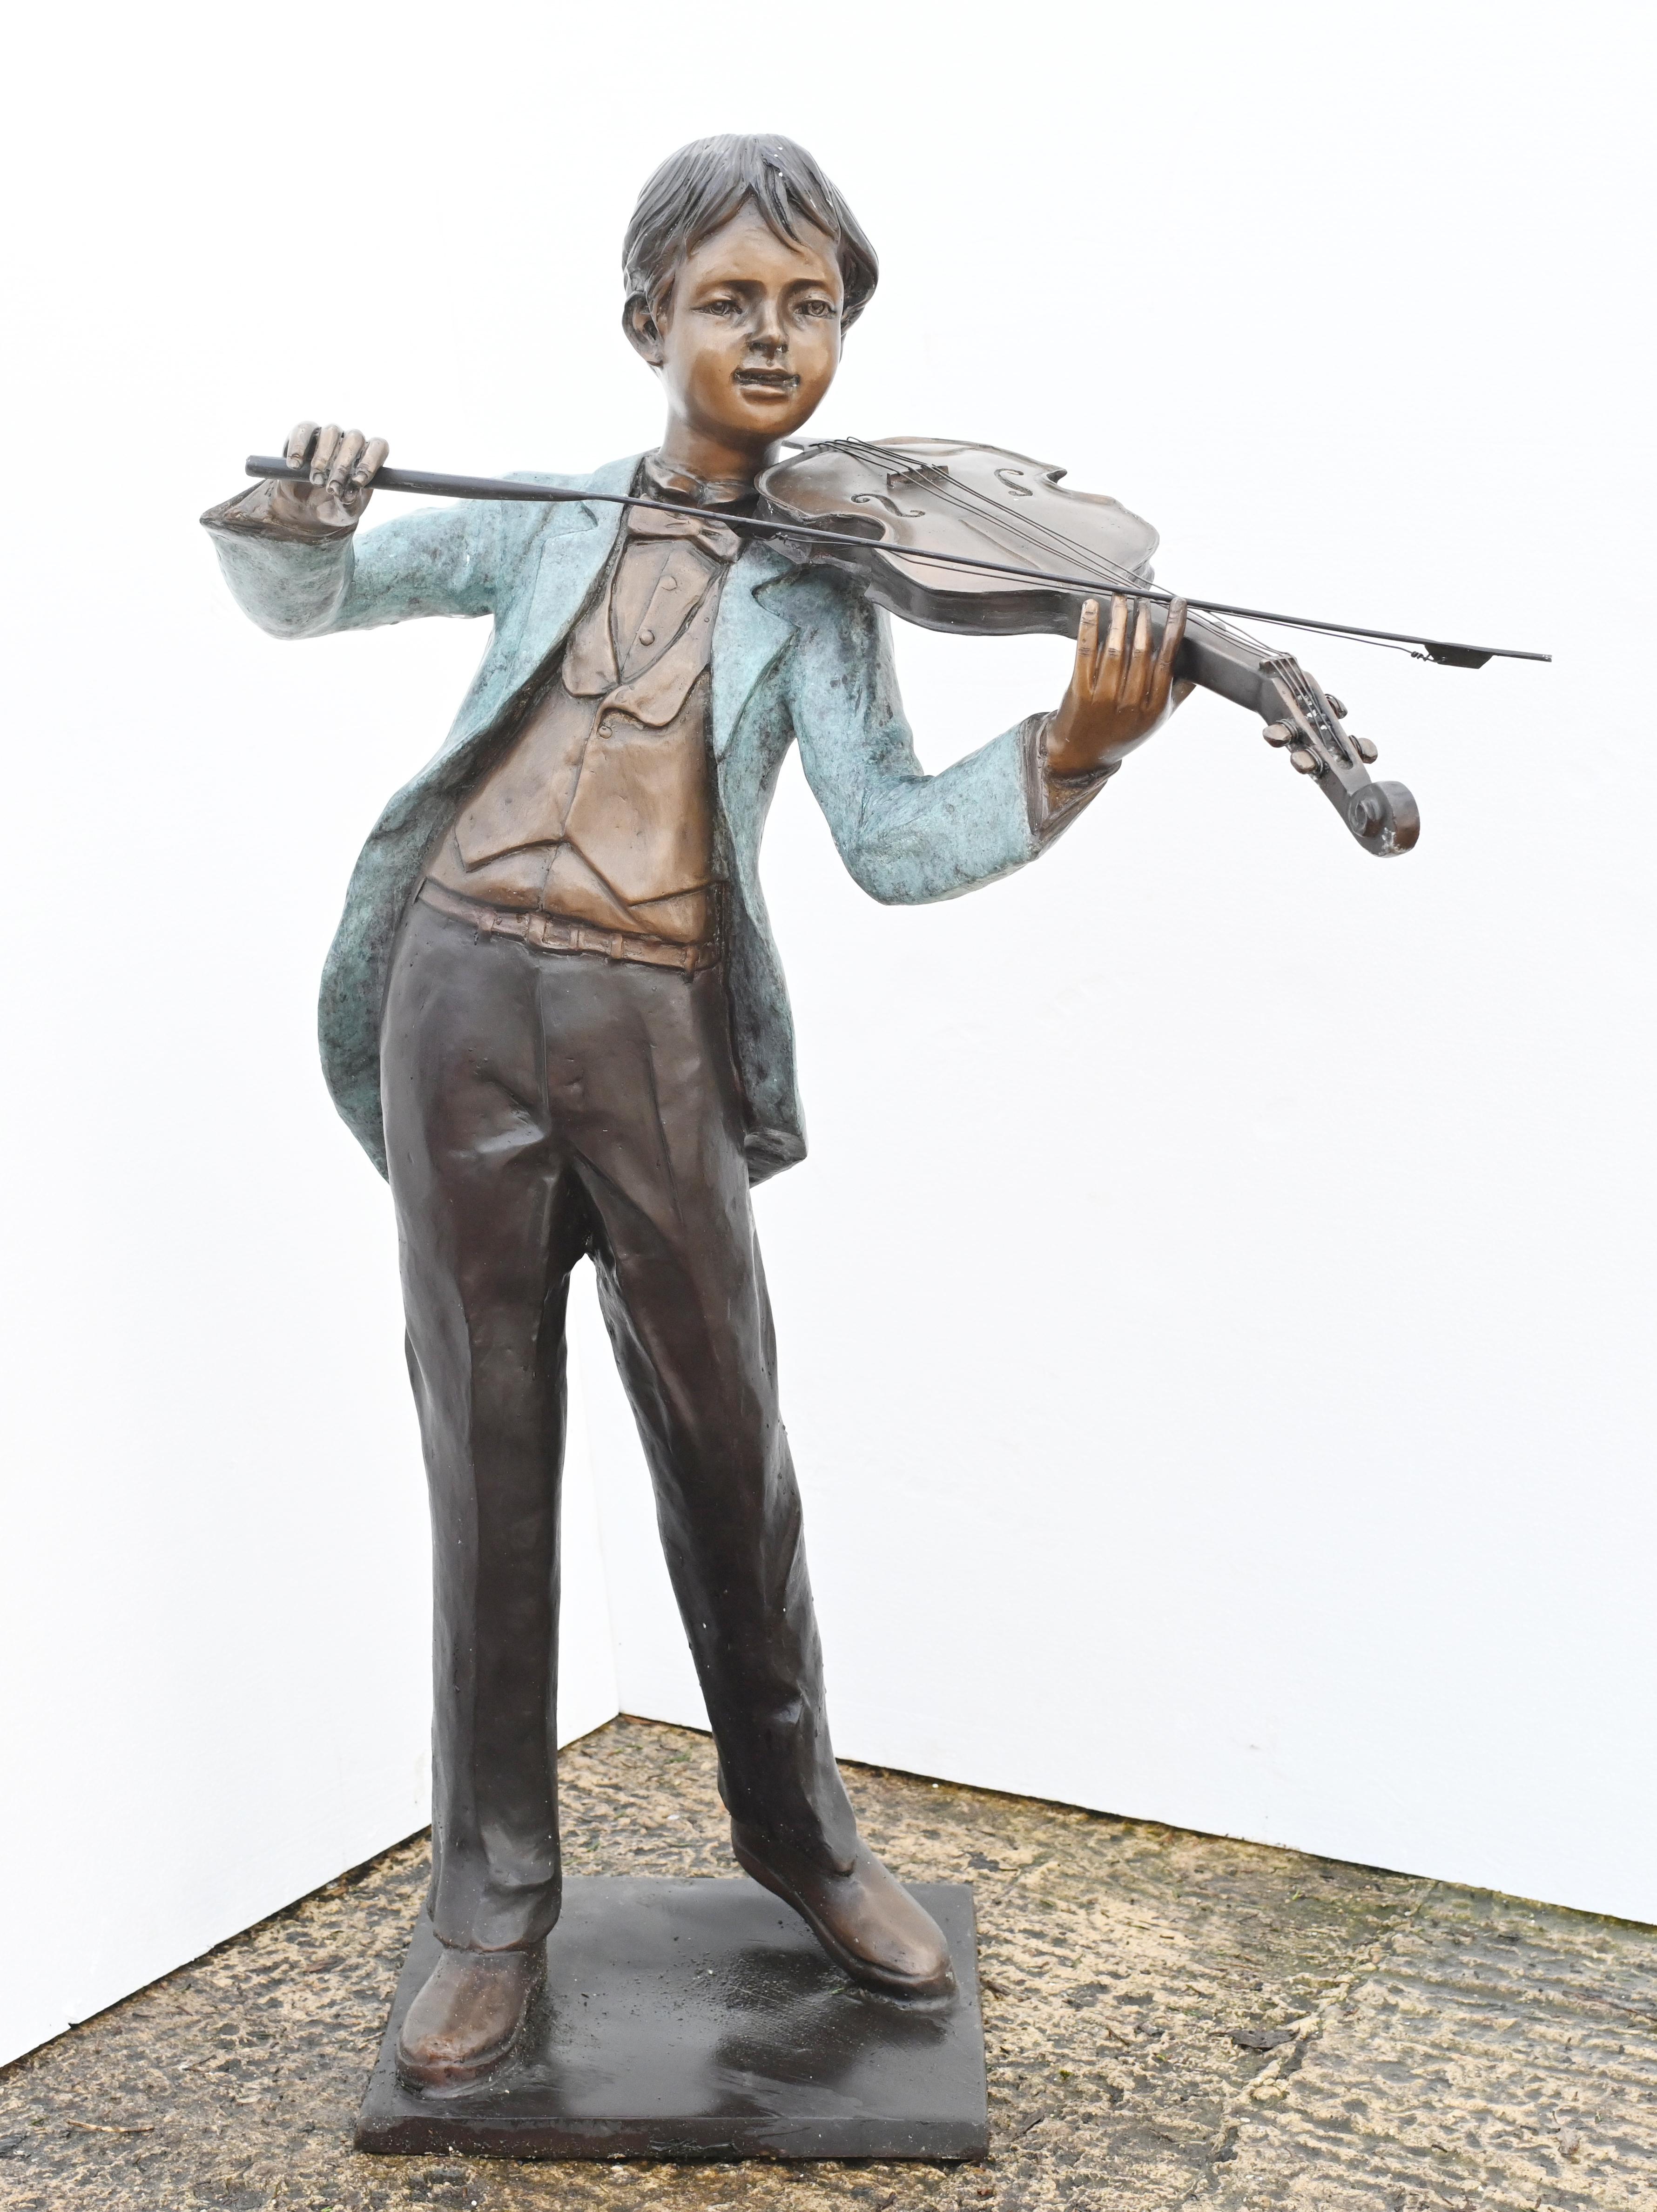 Wonderful statue of a bronze boy playing the violin
Believed to be modelled on Amadeus Mozart
Great patina and good size at four feet tall - 121 CM
Great for the garden and will not rust
Offered in great shape ready for home use right away
We ship